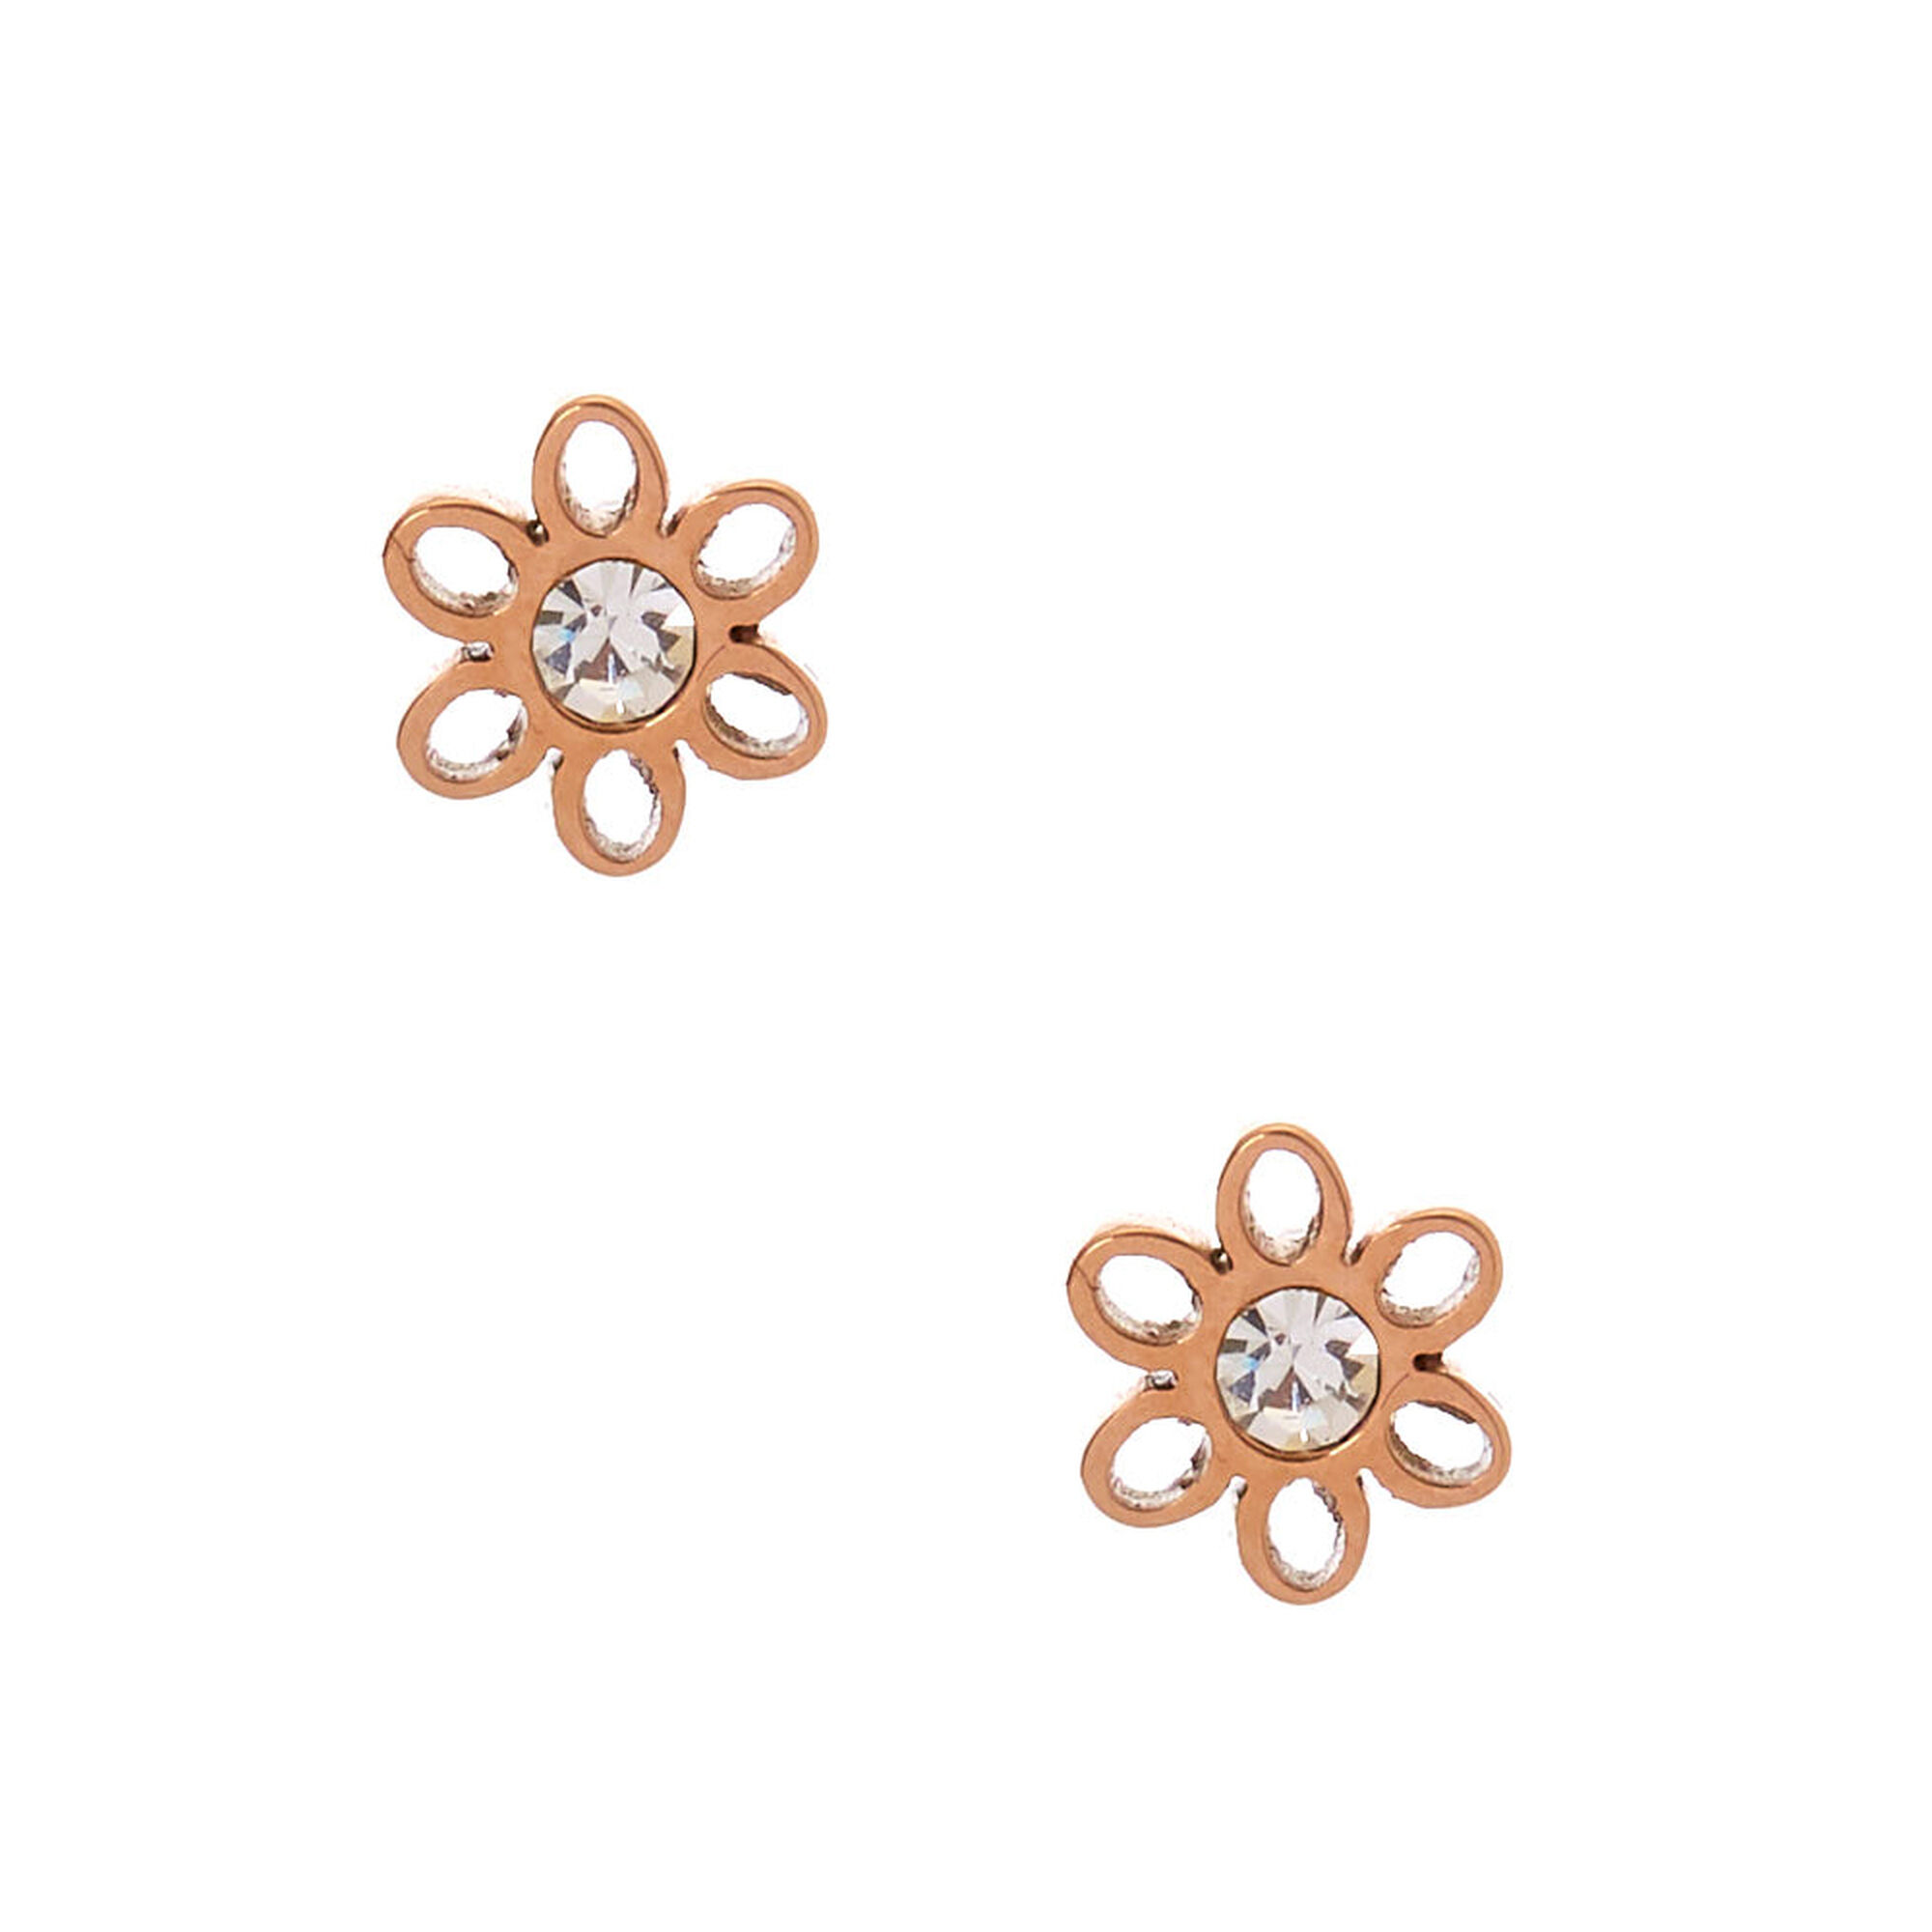 View Claires Rose Titanium Crystal Daisy Stud Earrings Gold information